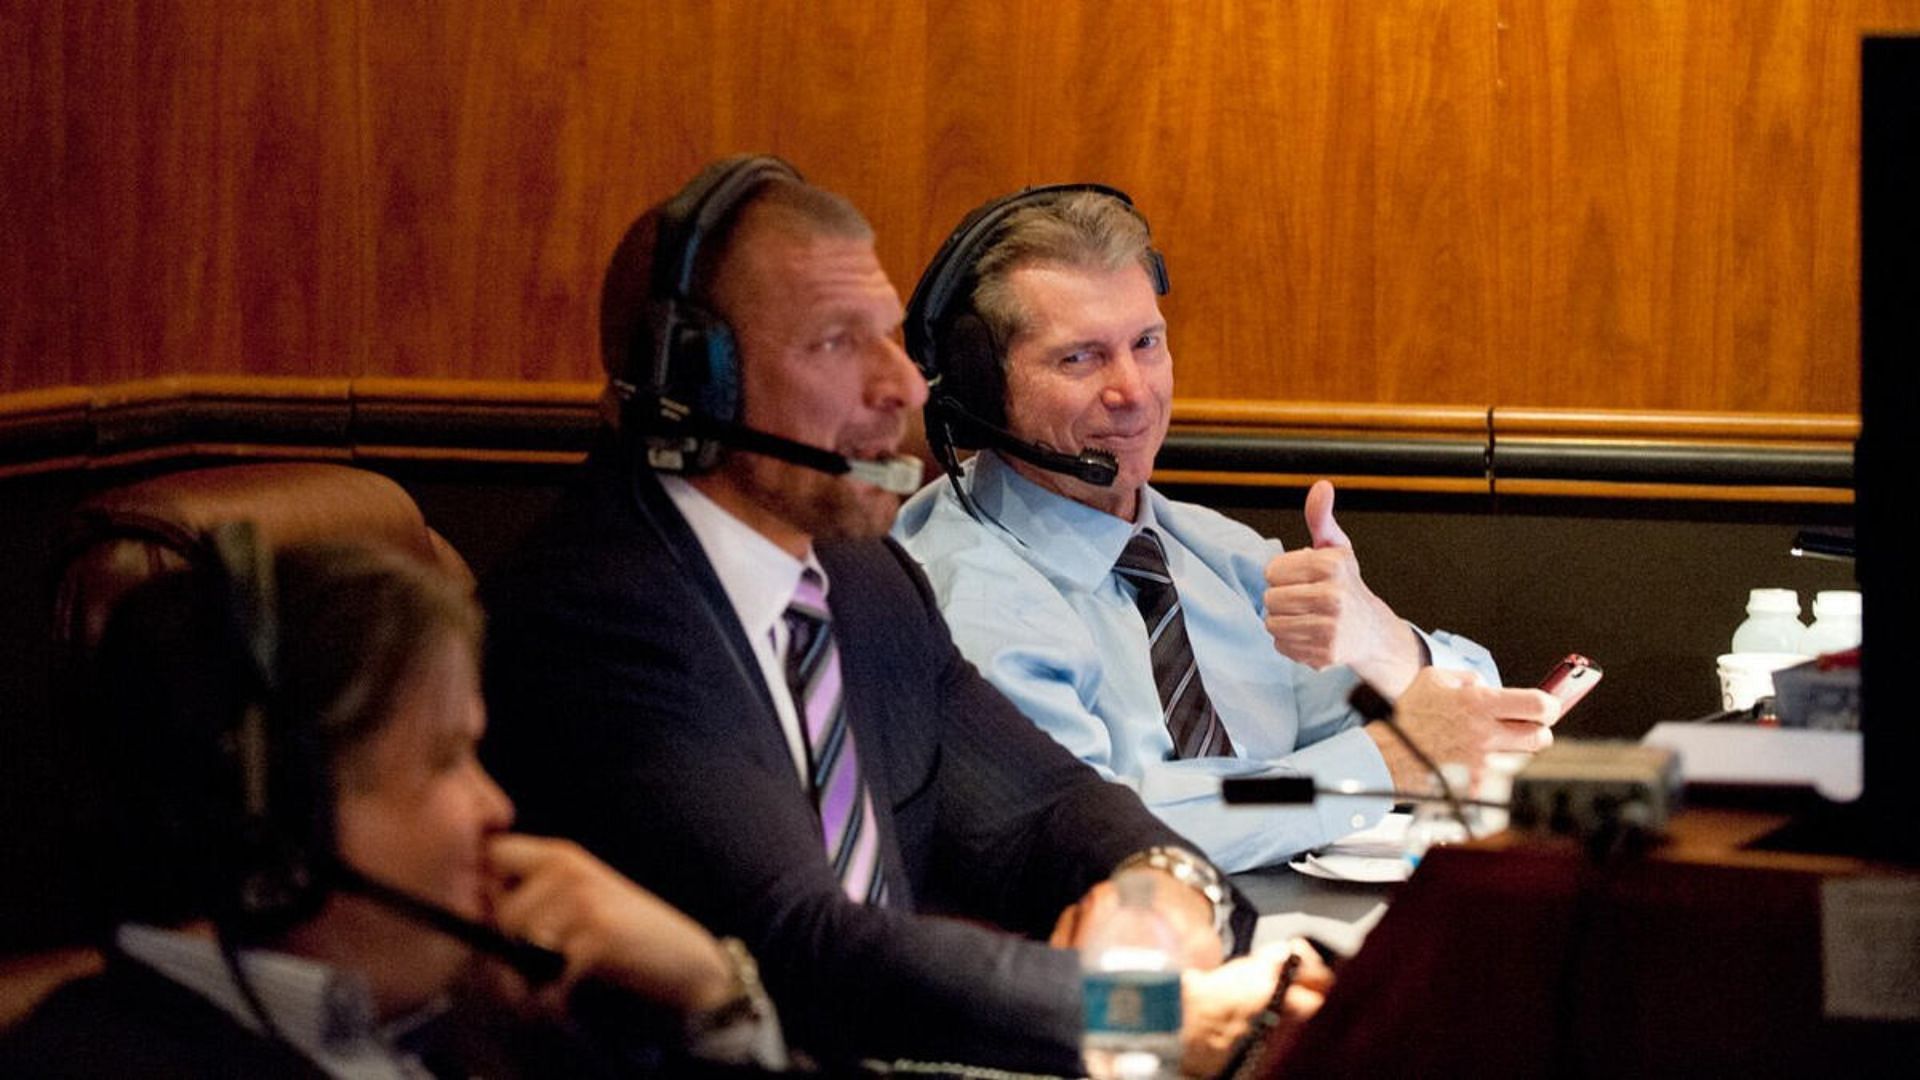 Vince McMahon was a historic figure on WWE television.